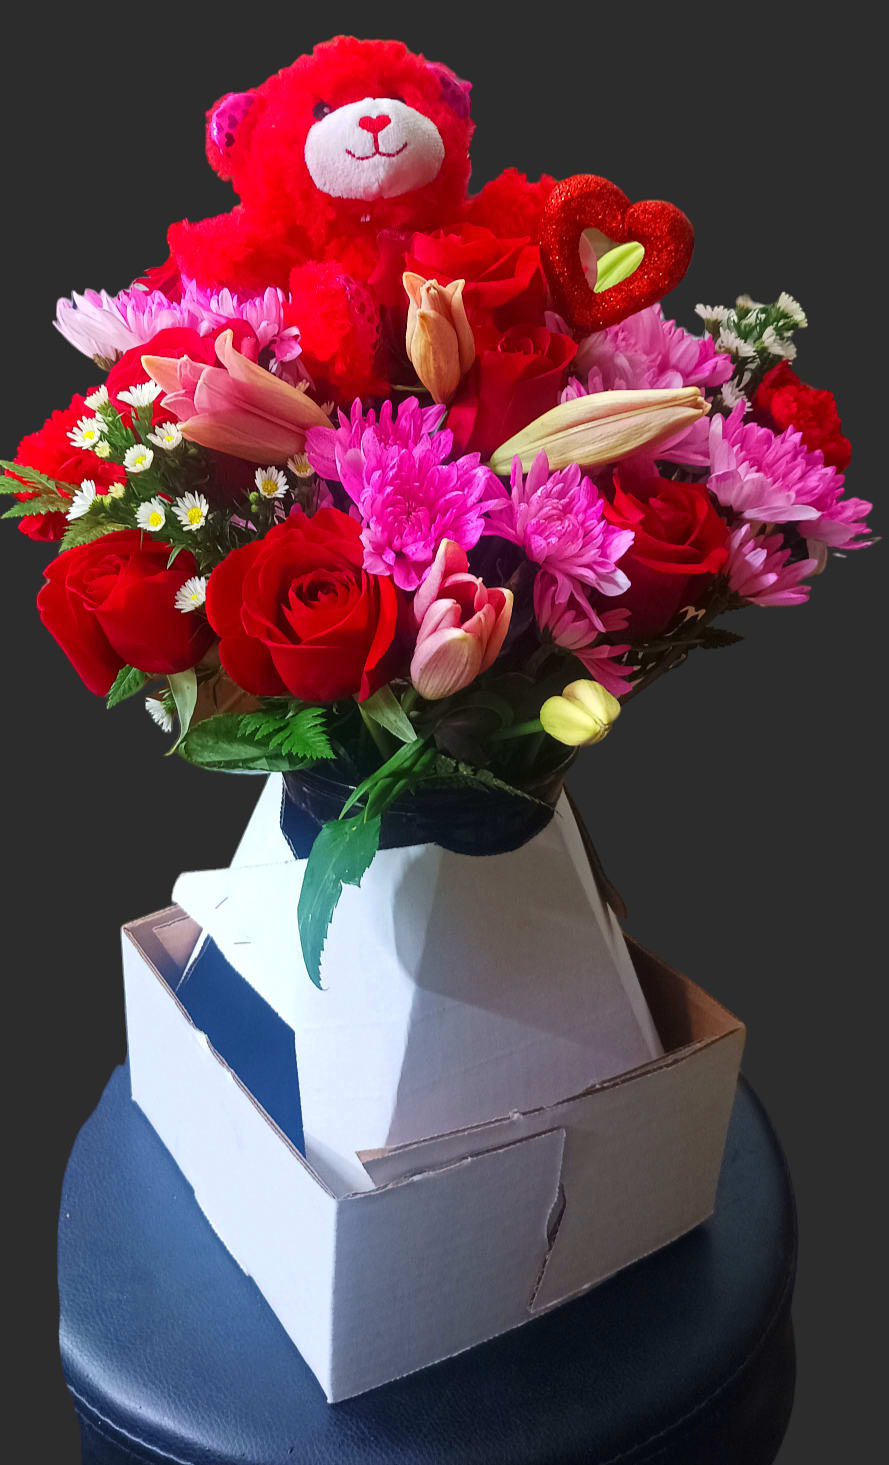 This is a sweet smelling pink and red bouquet expertly designed with